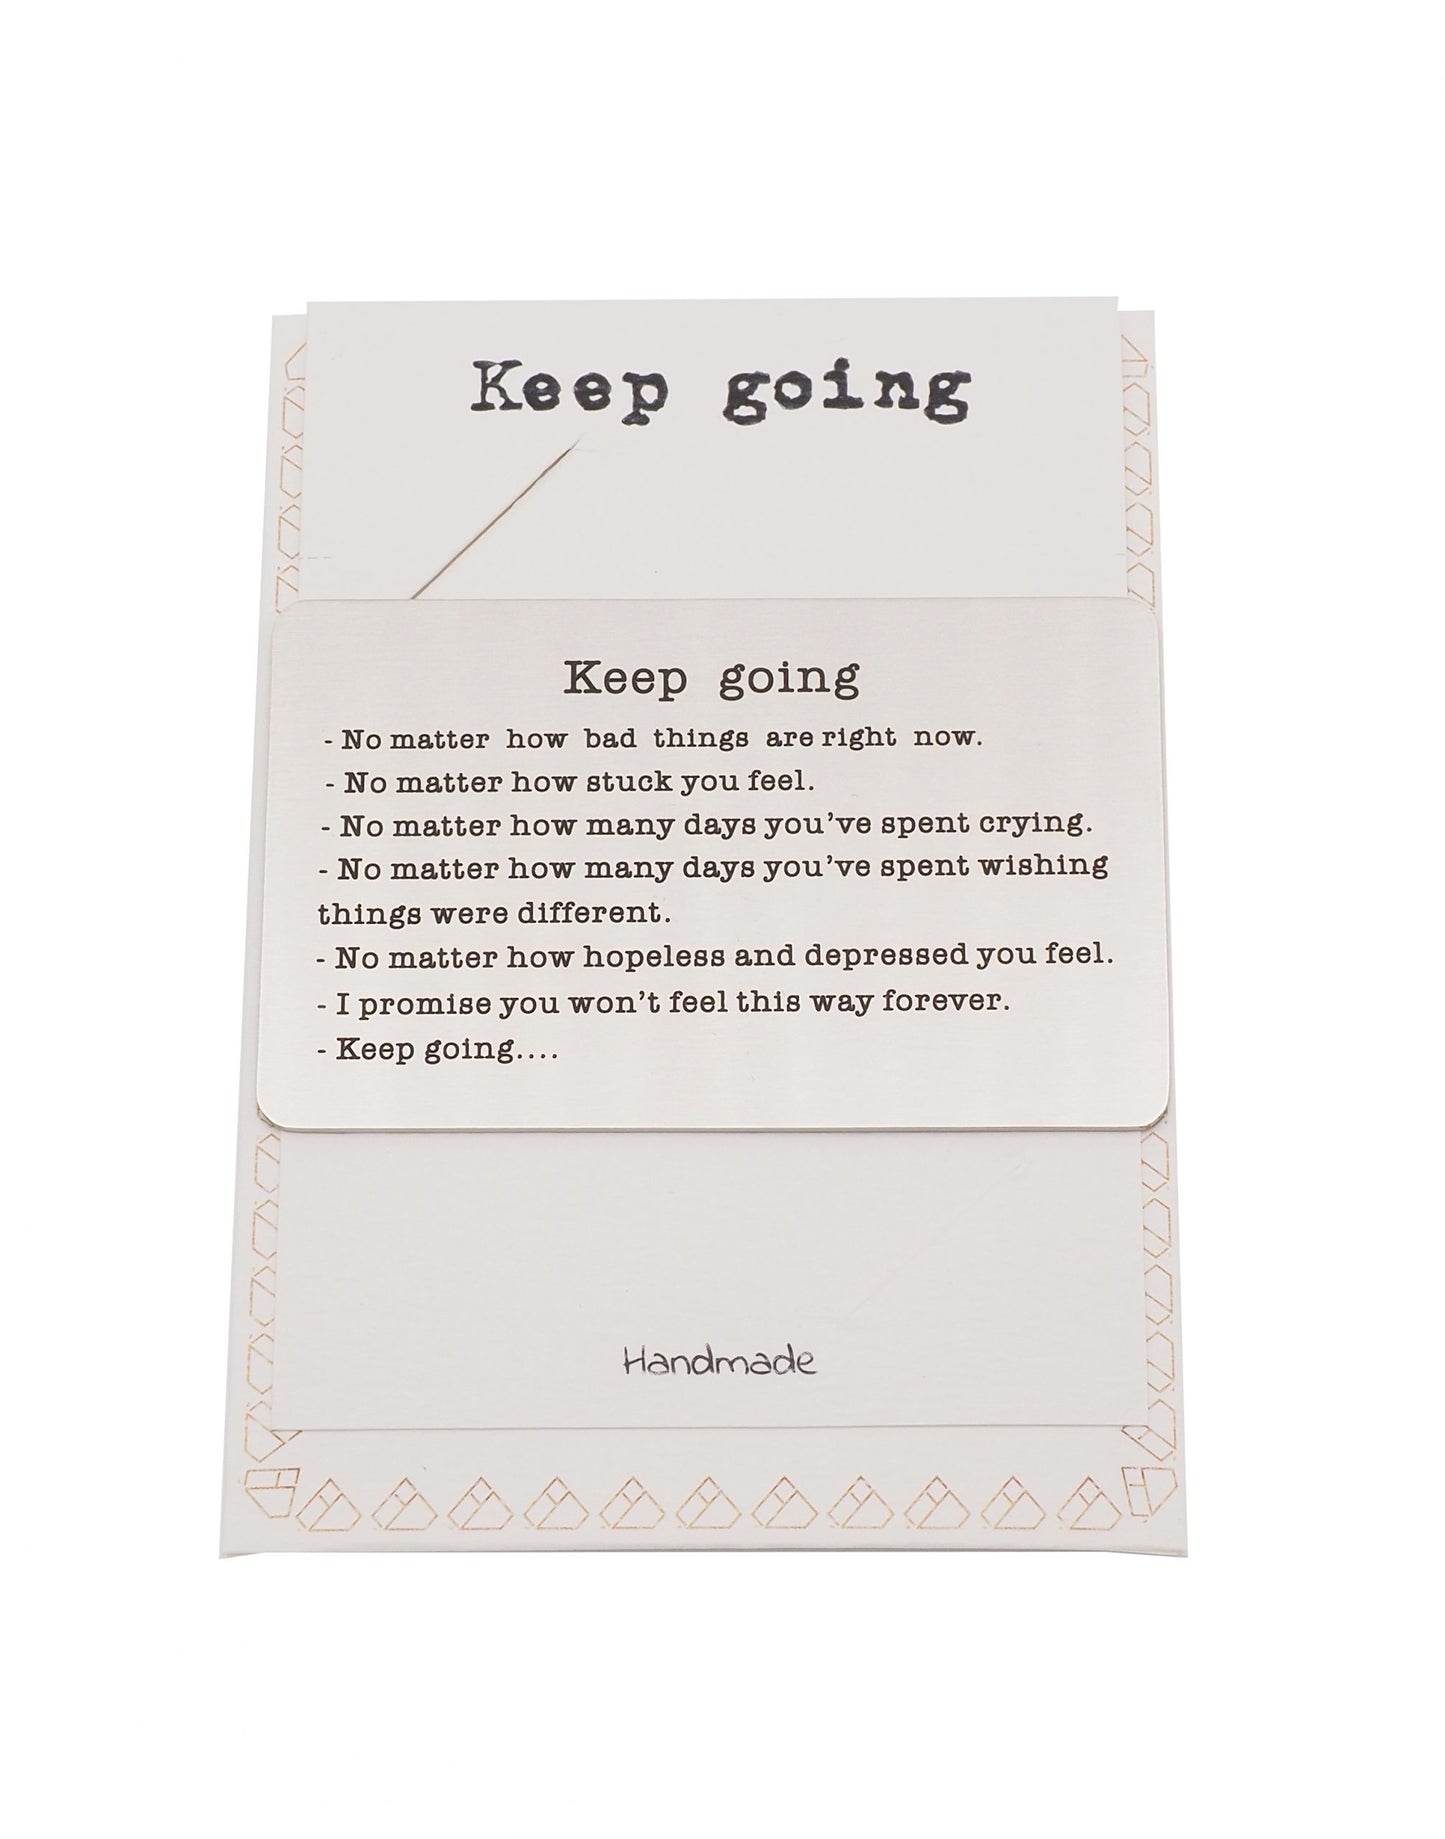 Quinnlyn & Co. Engraved Keep Going Wallet Card, Birthday Gifts for Special Someone, Gifts for Men with Inspirational Message